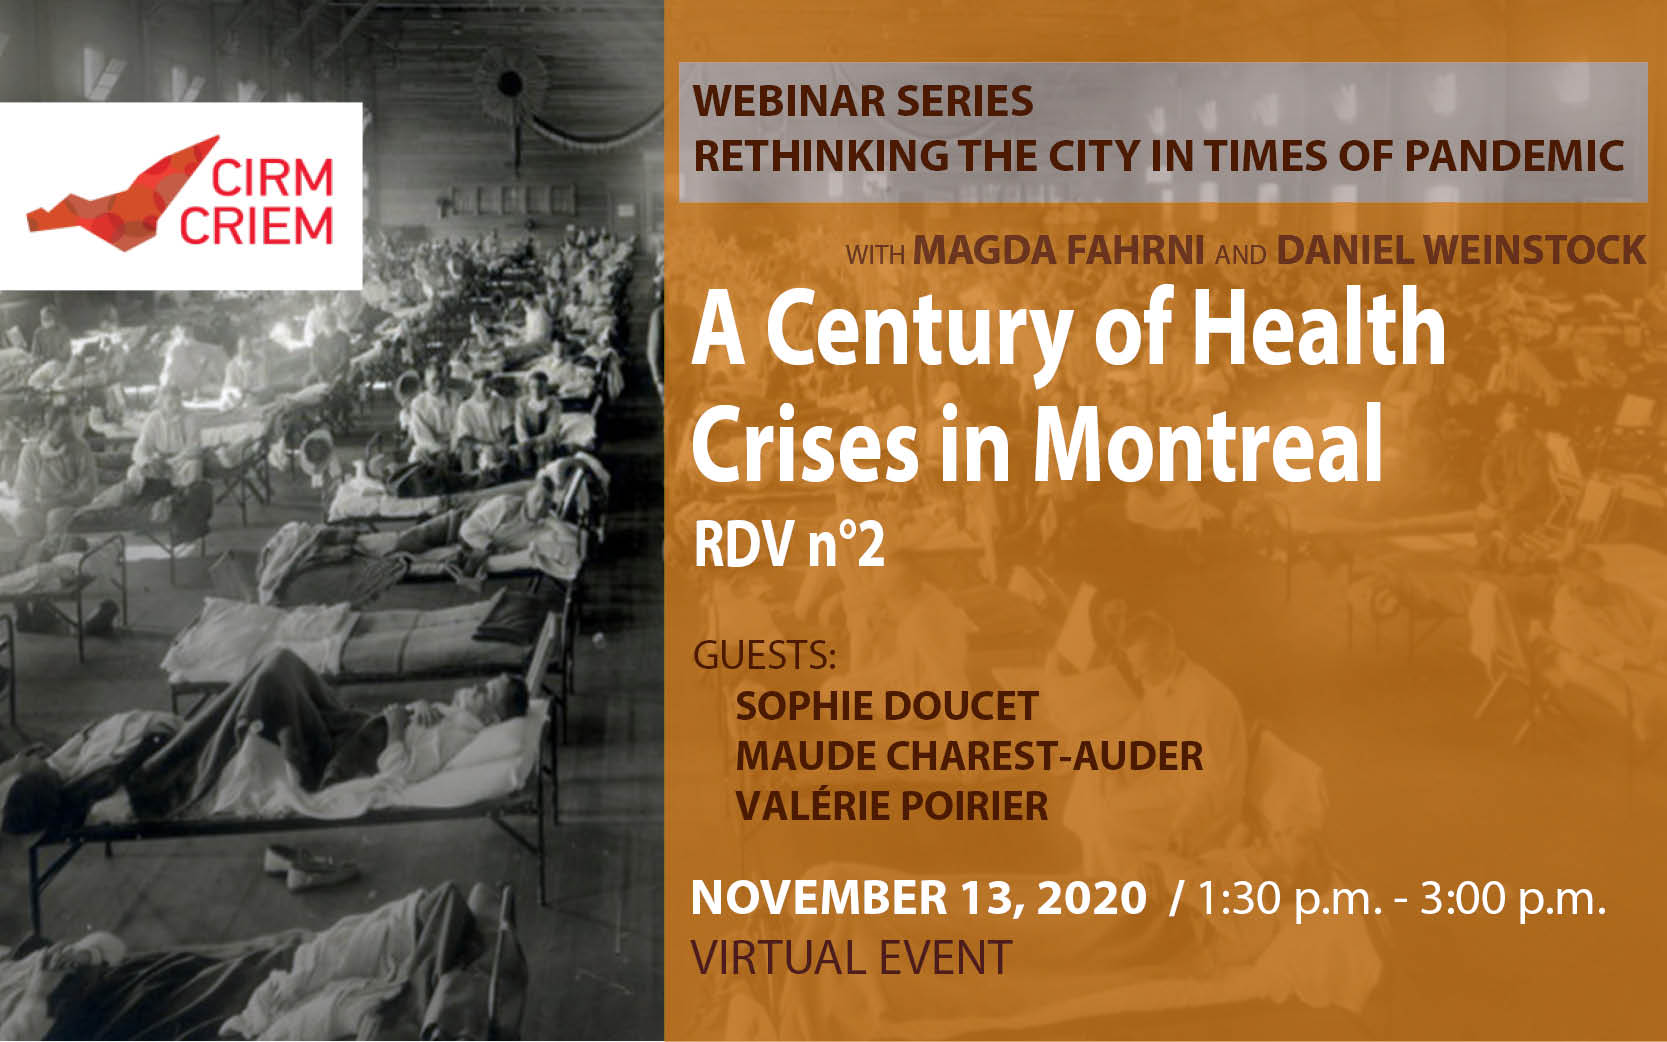 Poster for "A Century of Health Crises in Montréal"